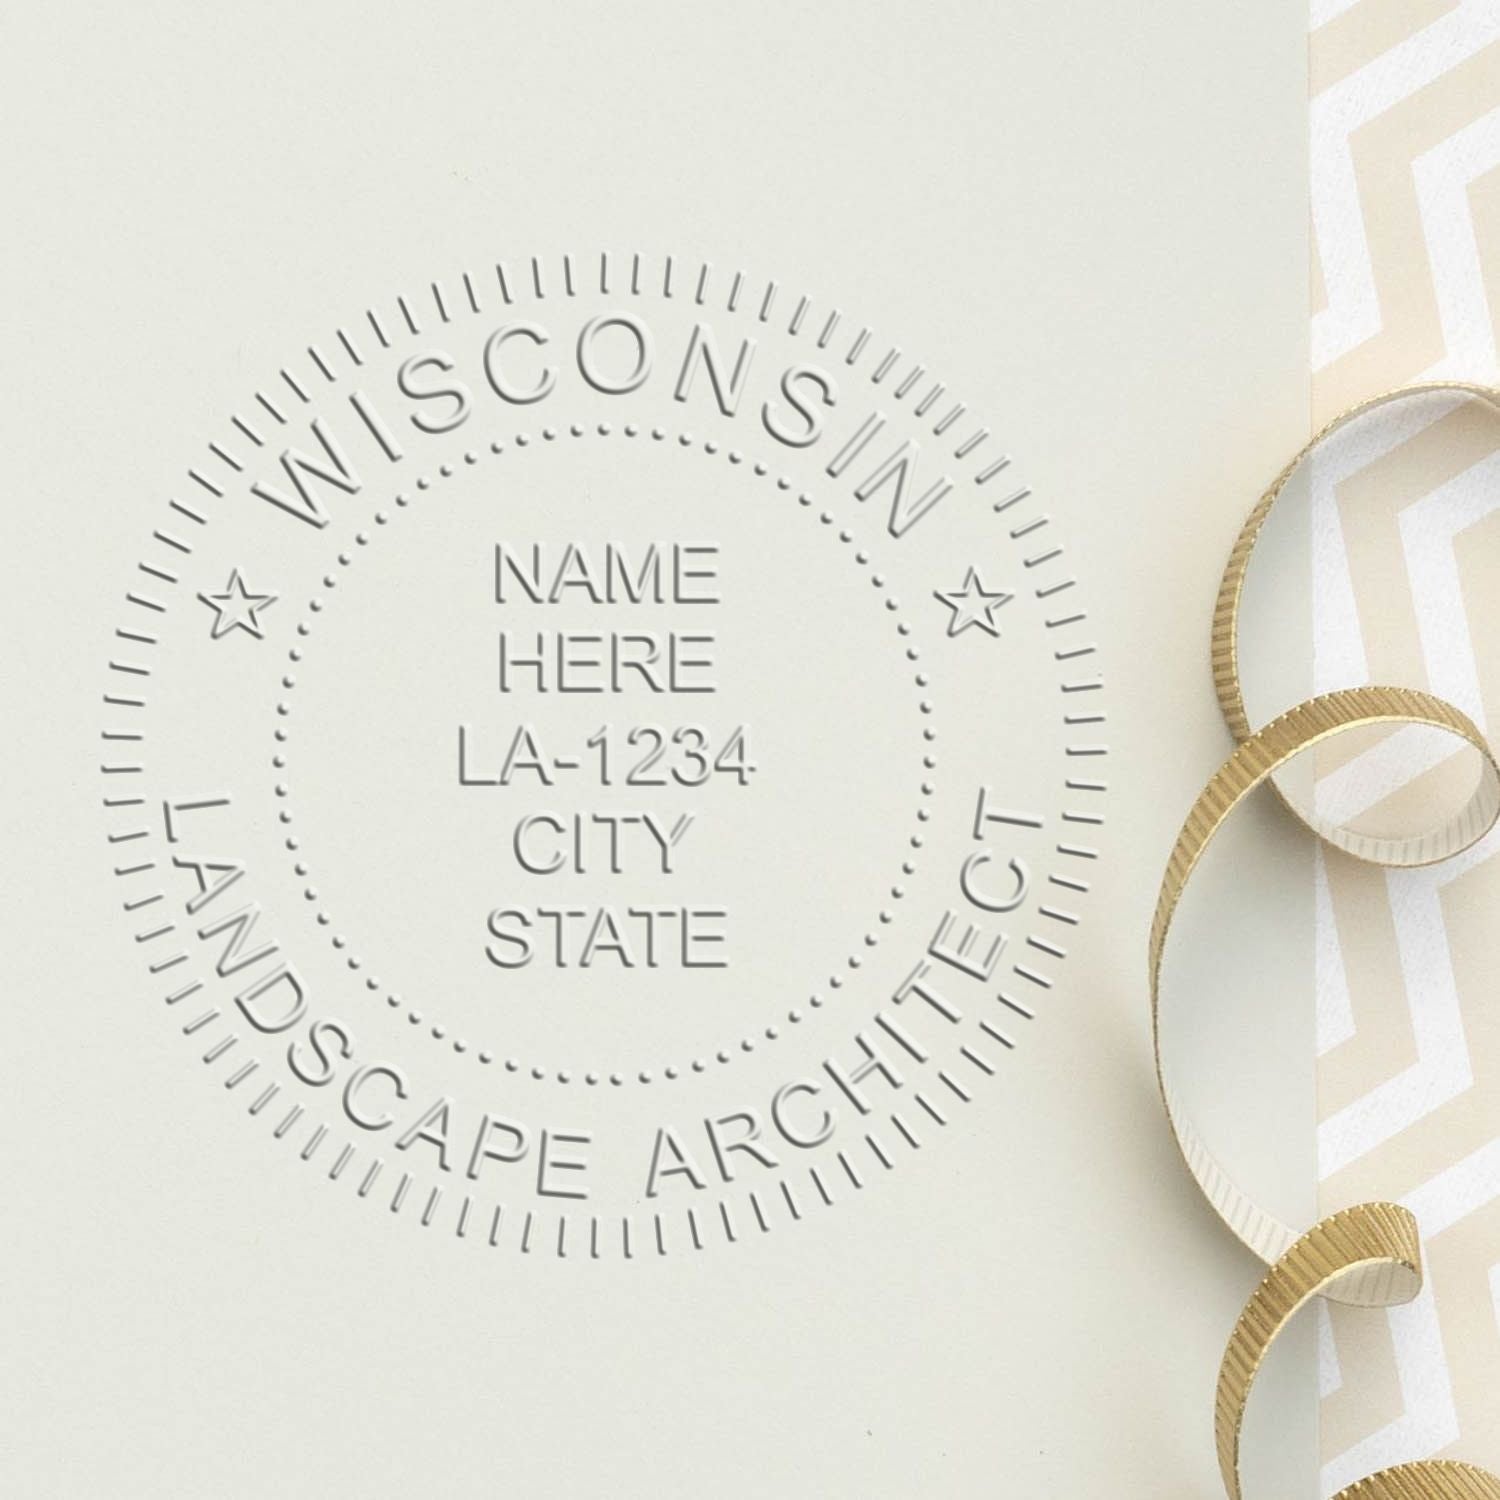 The Gift Wisconsin Landscape Architect Seal stamp impression comes to life with a crisp, detailed image stamped on paper - showcasing true professional quality.